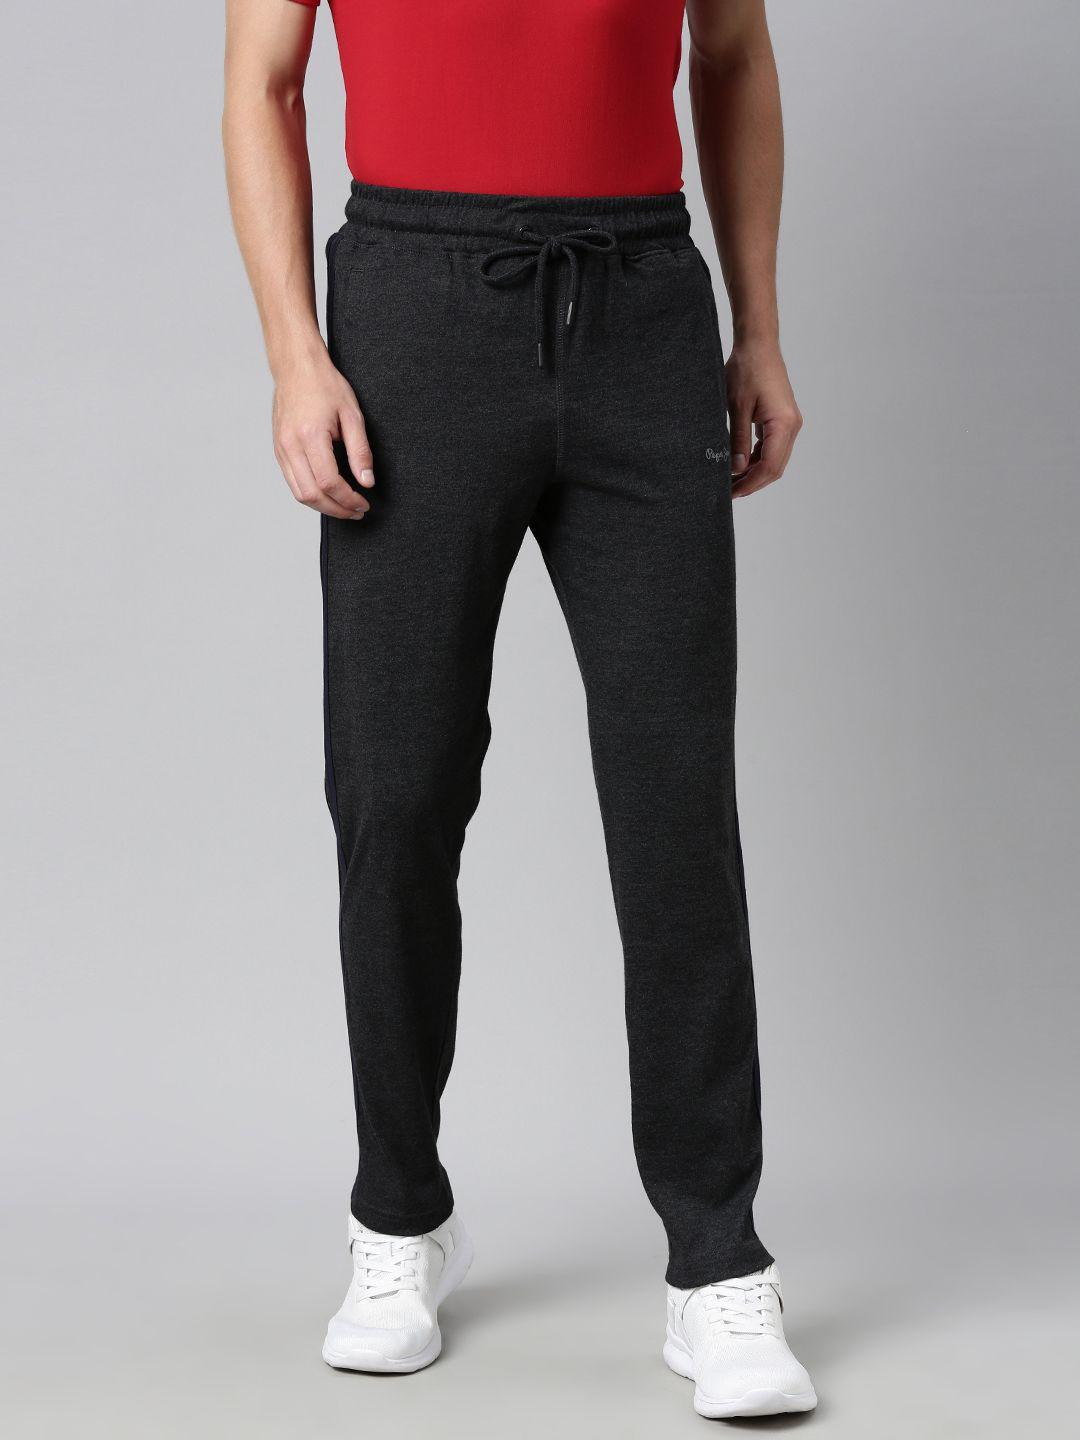 pepe-jeans-men-charcoal-grey-solid-track-pants